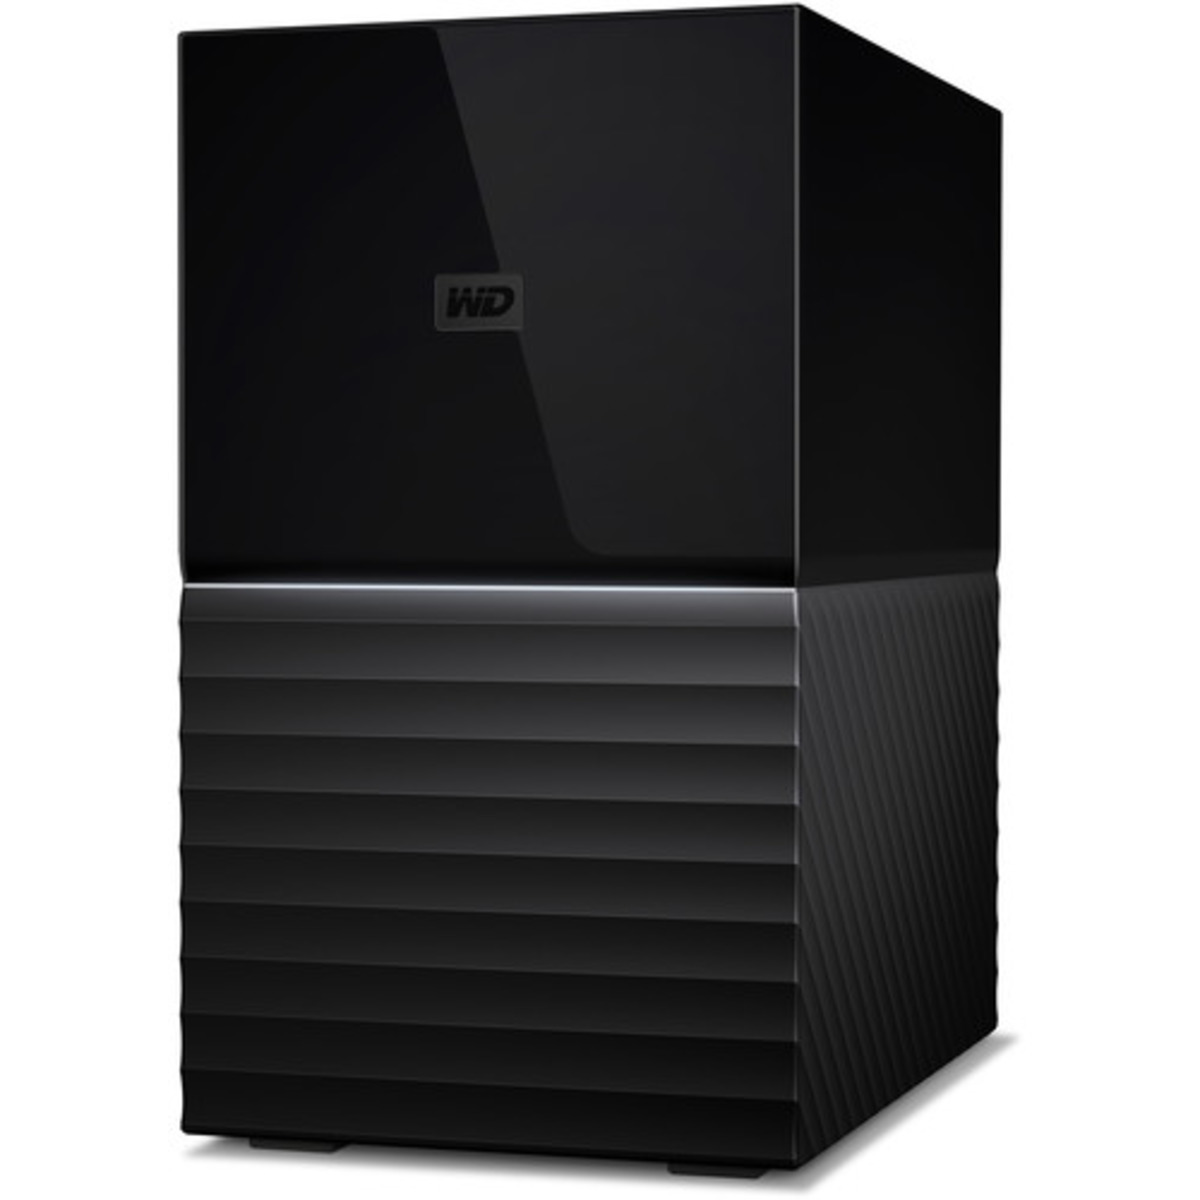 buy $829 Western Digital My Book DUO Gen 2 4tb Desktop DAS - Direct Attached Storage Device 2x2000gb Western Digital Red SA500 WDS200T1R0A 2.5 SATA 6Gb/s SSD NAS Class Drives Installed - Burn-In Tested - ON SALE - nas headquarters buy network attached storage server device das new raid-5 free shipping usa My Book DUO Gen 2